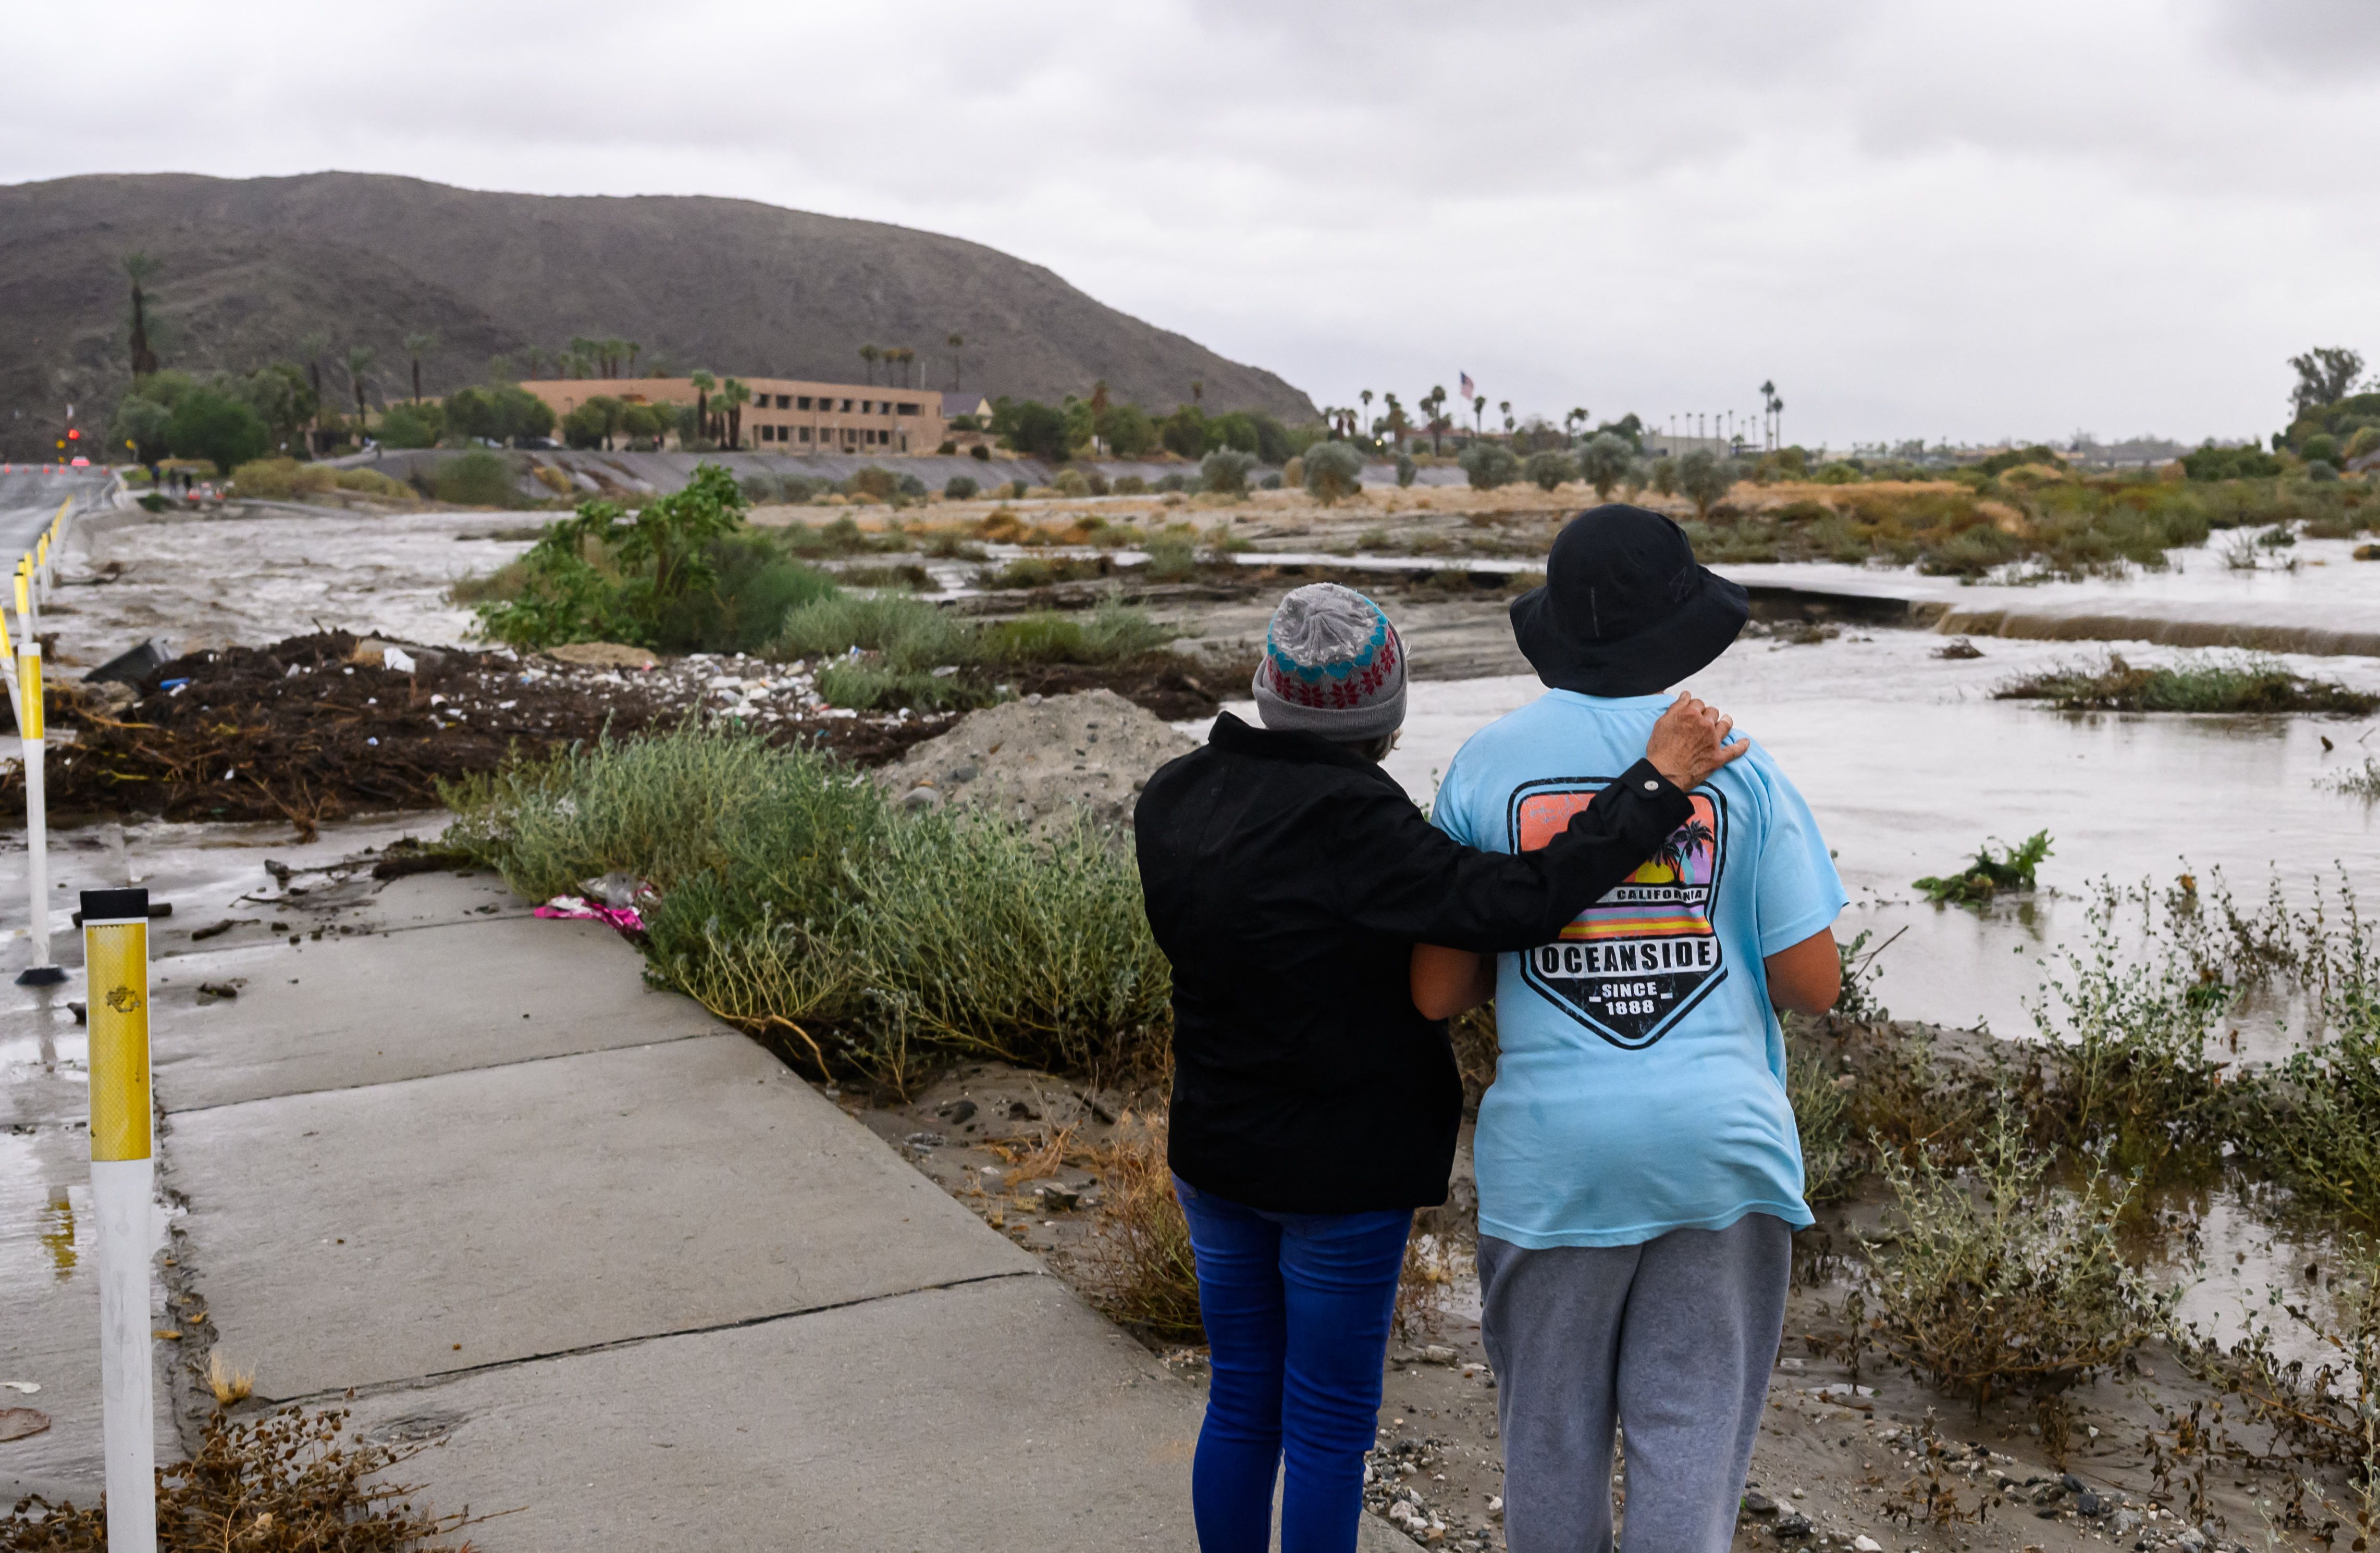 Pedestrians look towards a flooded waterway as tropical storm Hilary makes landfall in Rancho Mirage, California on August, 20, 2023. Heavy rains lashed California as Tropical Storm Hilary raced in from Mexico, bringing warnings of potentially life-threatening flooding in the typically arid southwestern United States.